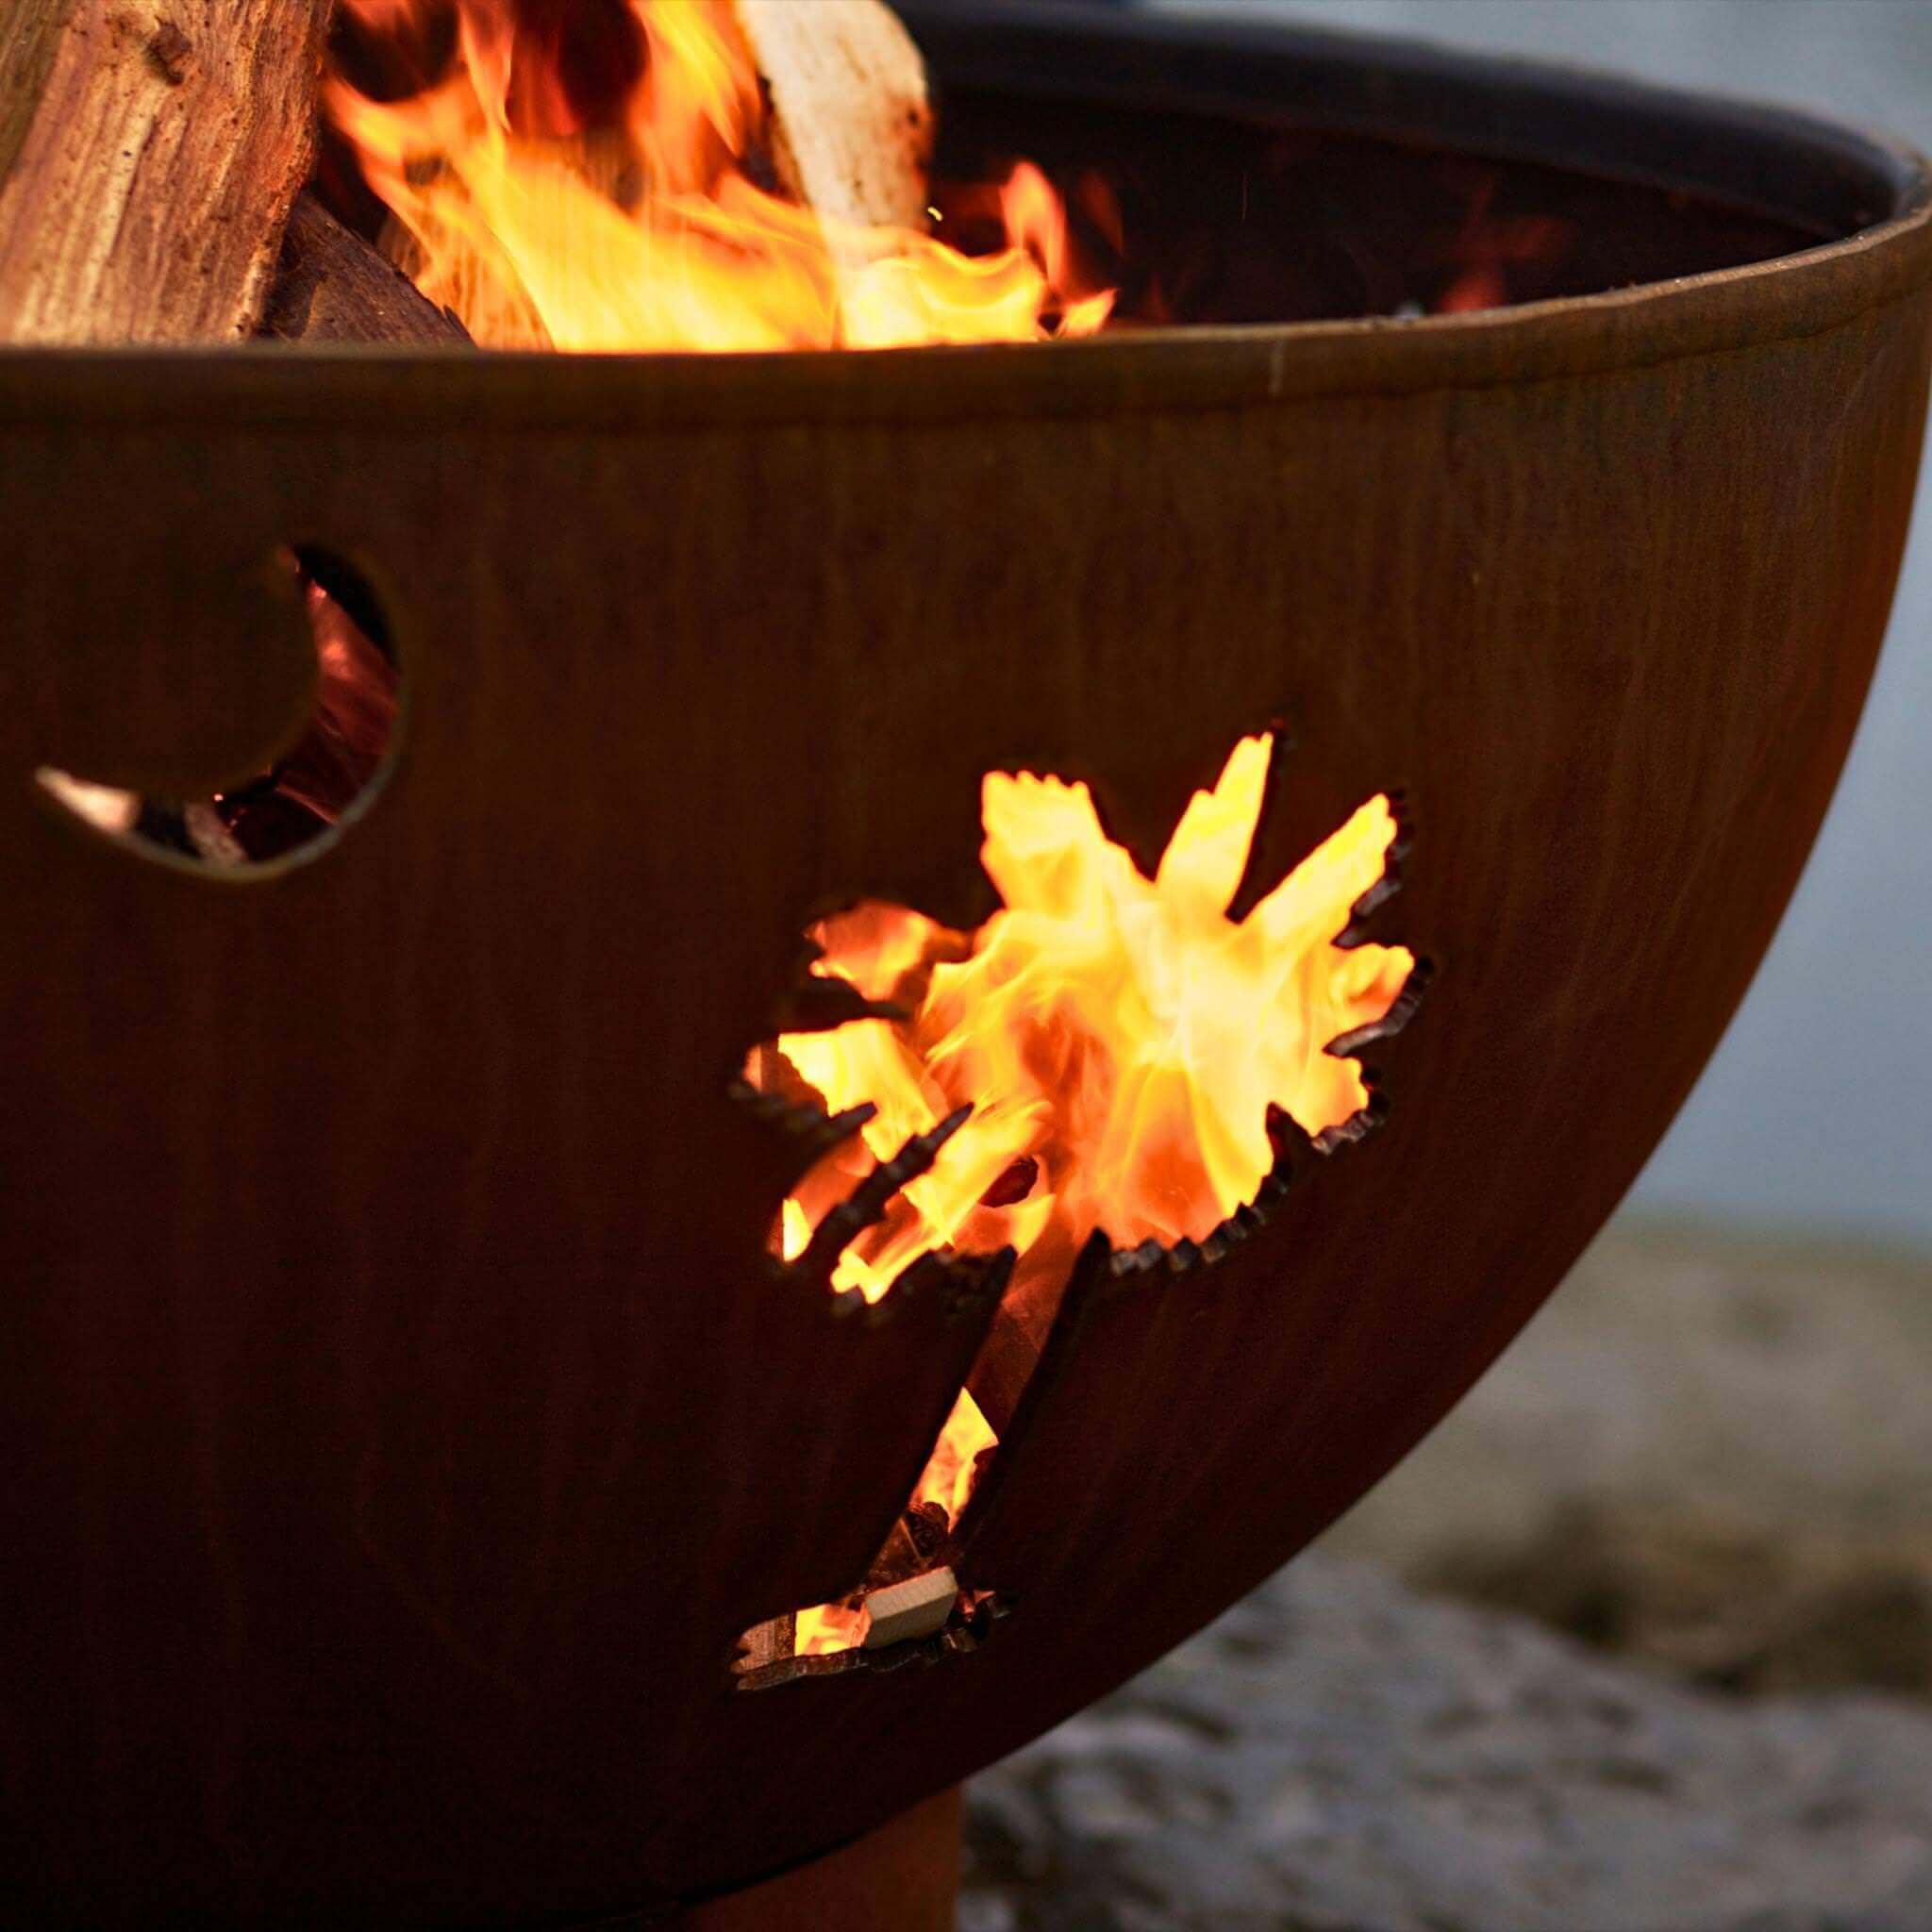 "Tropical Moon" Wood Burning Fire Pit in Steel - Fire Pit Art